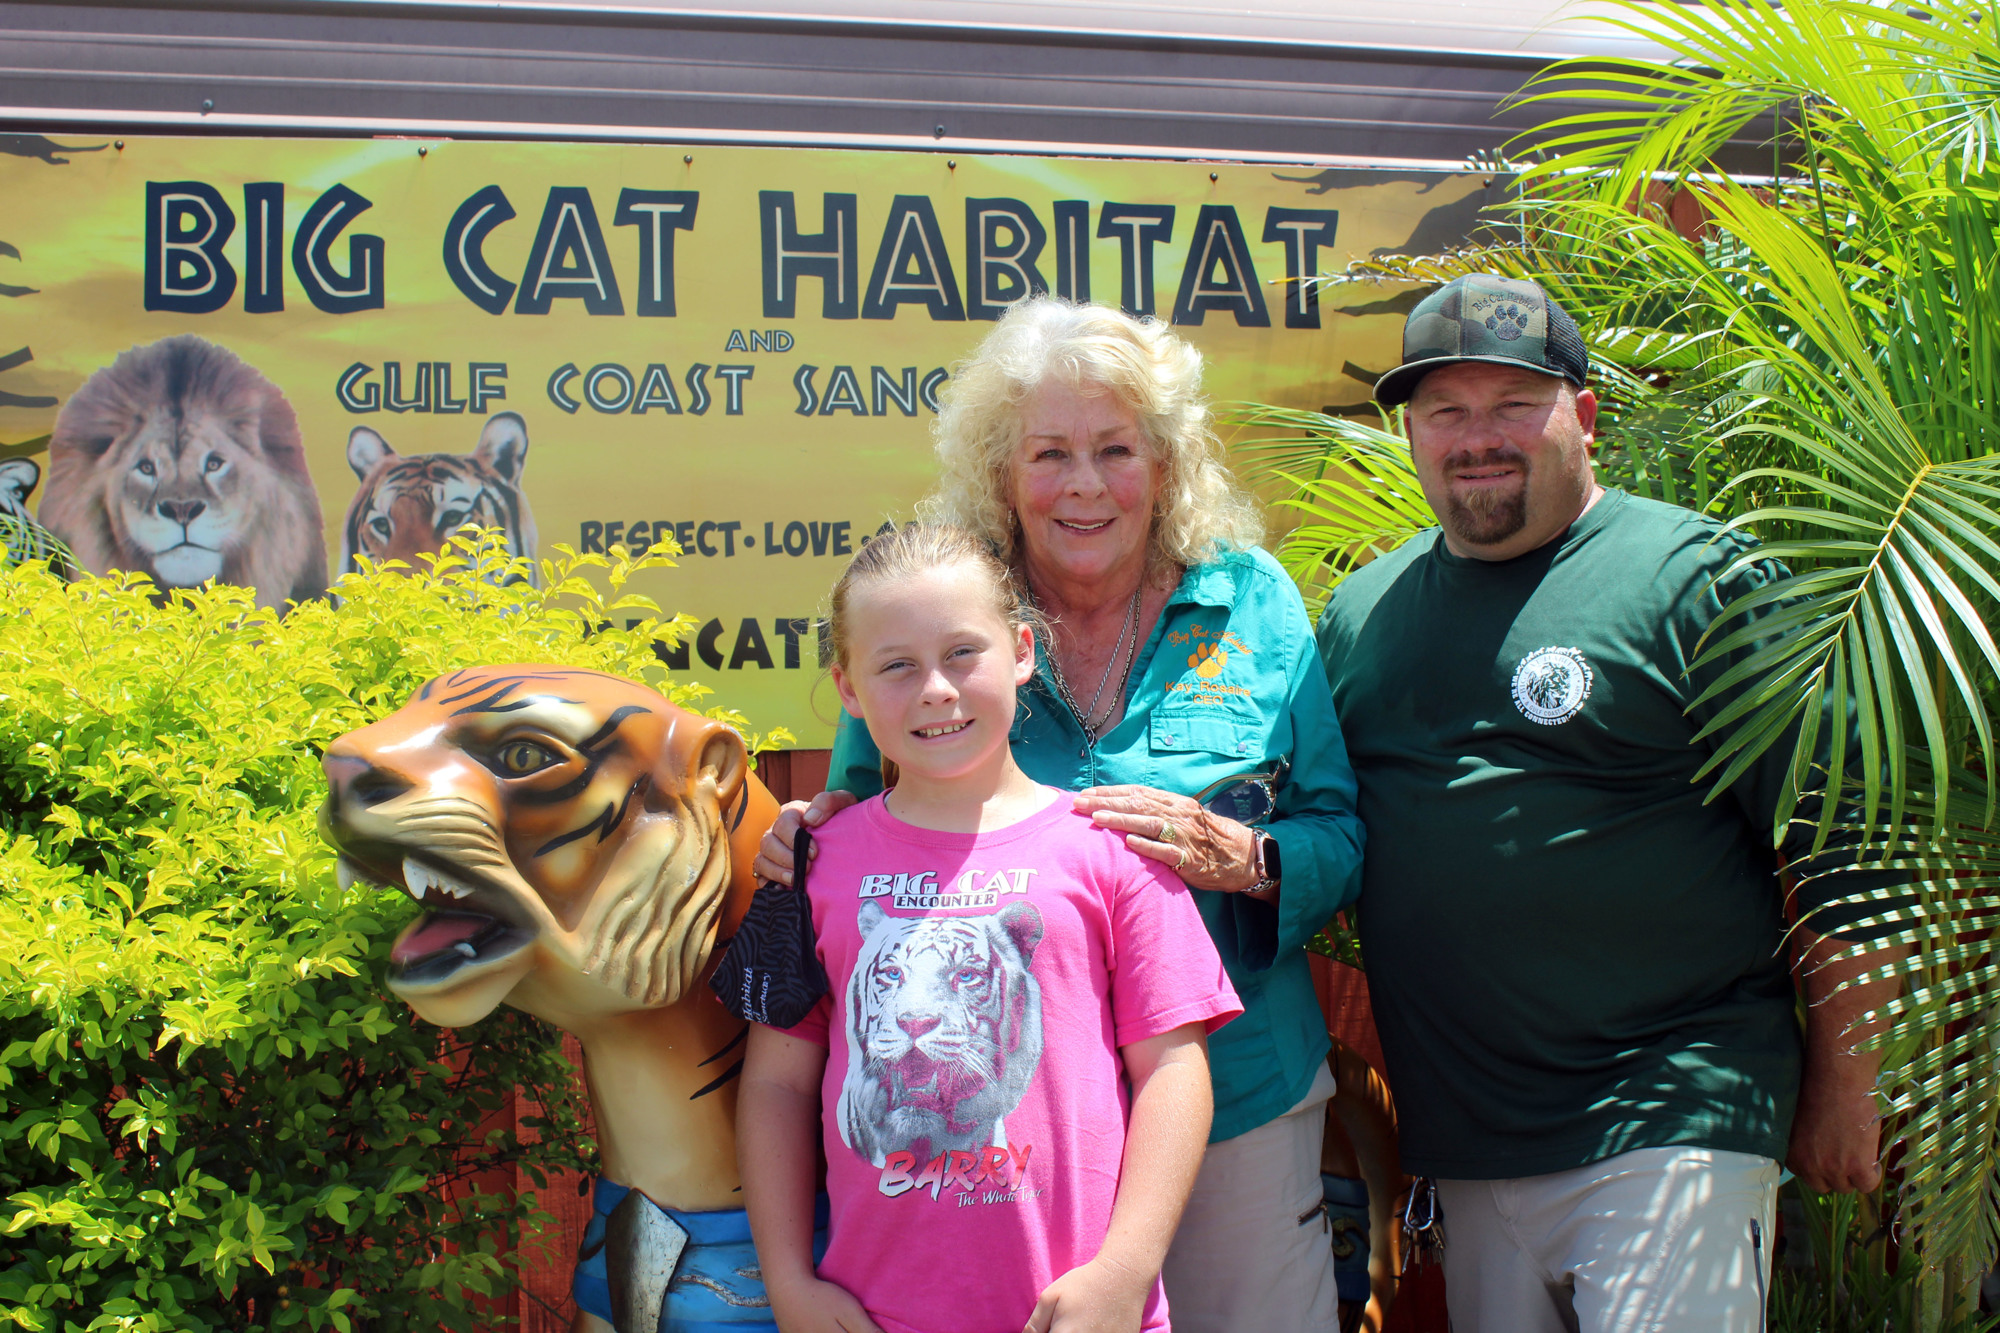 Ella, Kay and Clayton Rosaire make up three generations that care for animals at Big Cat Habitat and Gulf Coast Sanctuary. Kay Rosaire started the habitat 1987, and now Clayton cares for the animals while Ella gives tours to kids her age. 